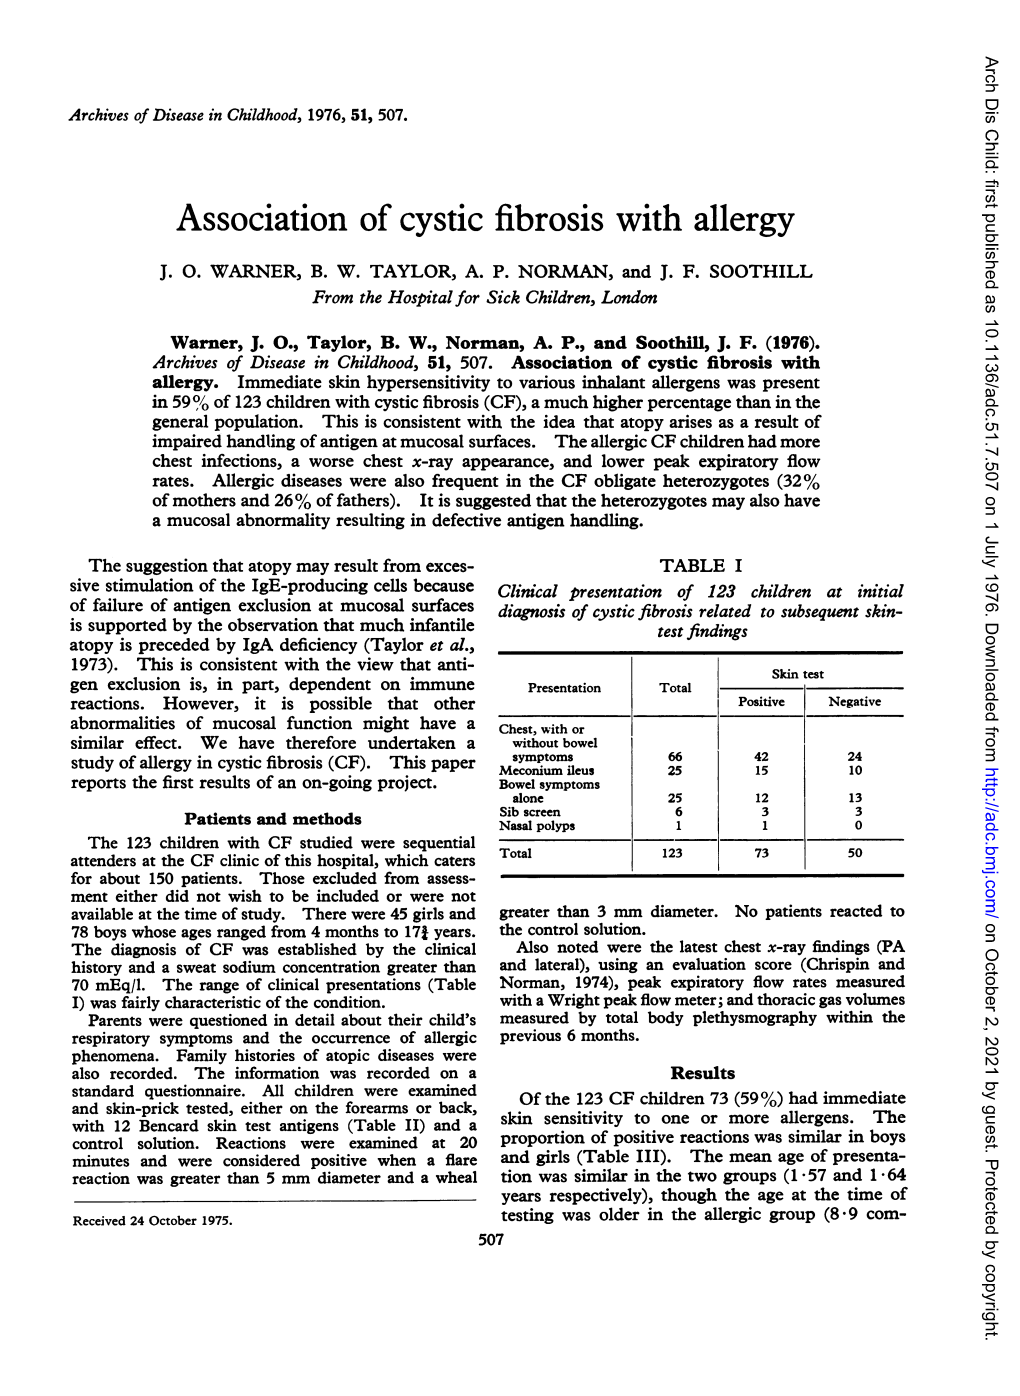 Association of Cystic Fibrosis Withallergy